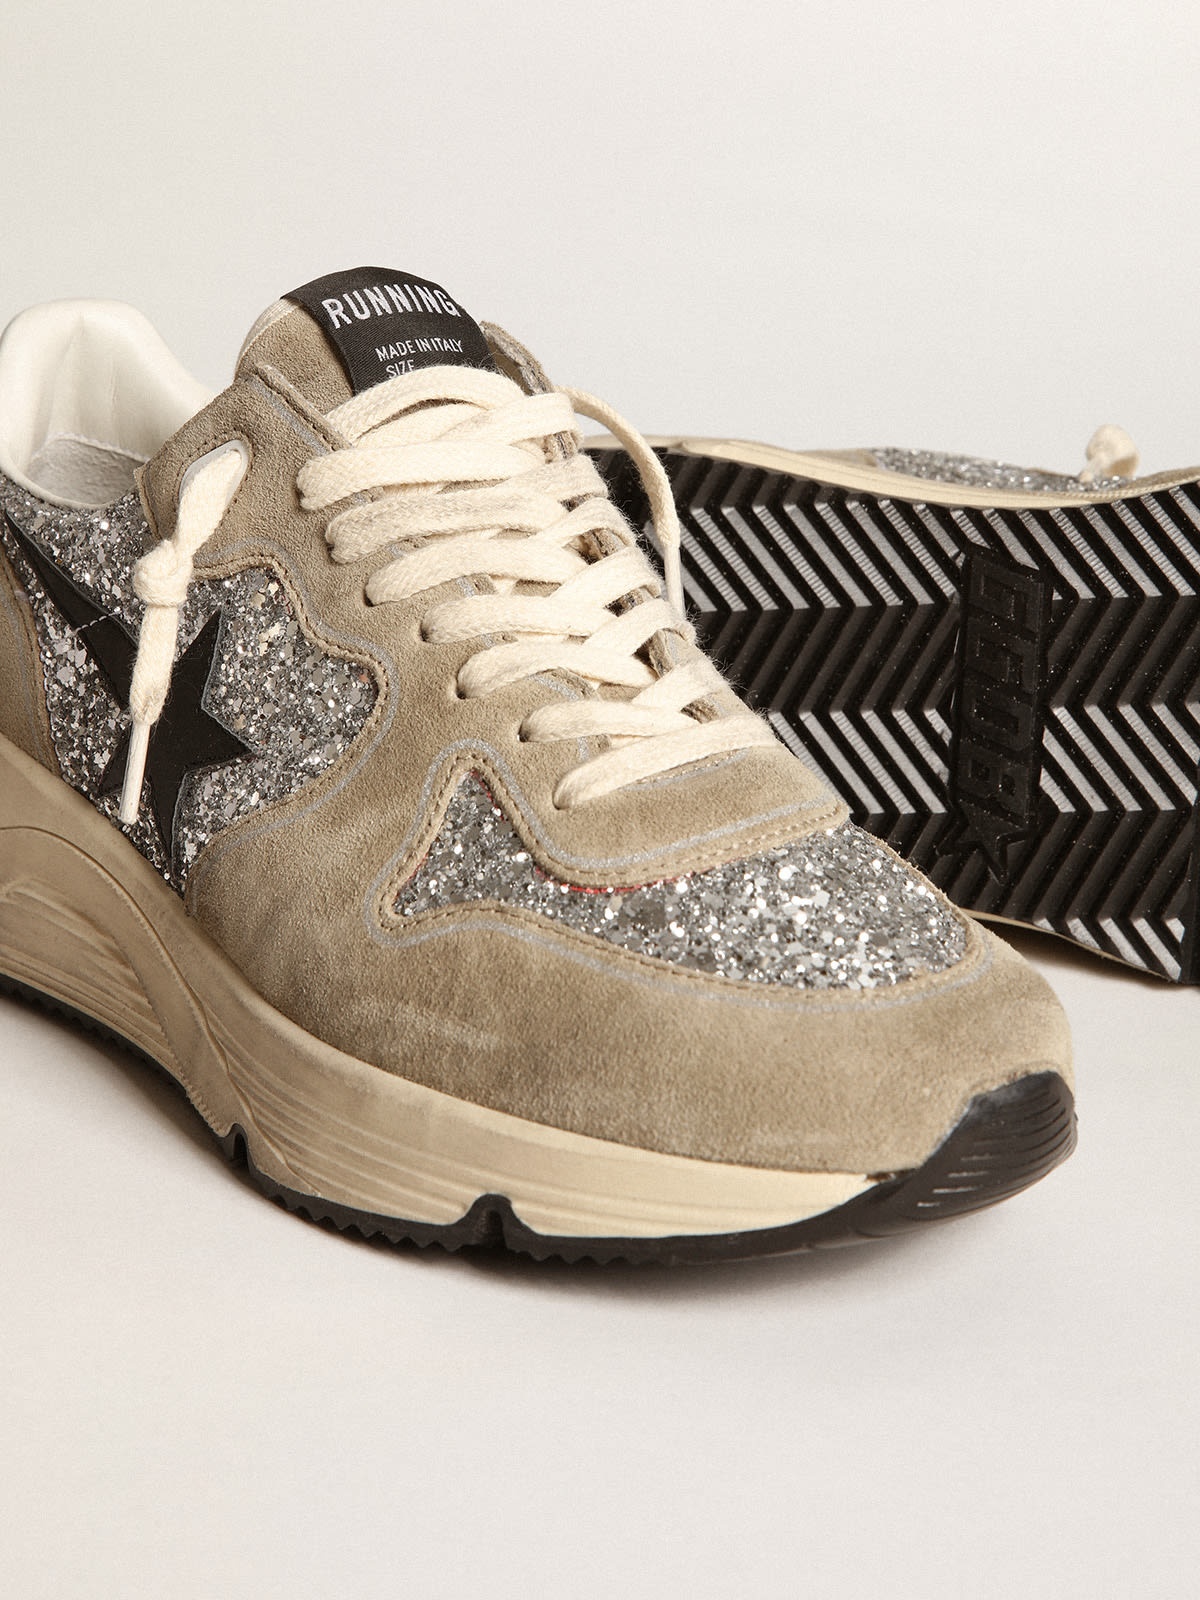 Running Sole sneakers in silver glitter and dove-gray suede with black leather star - 3